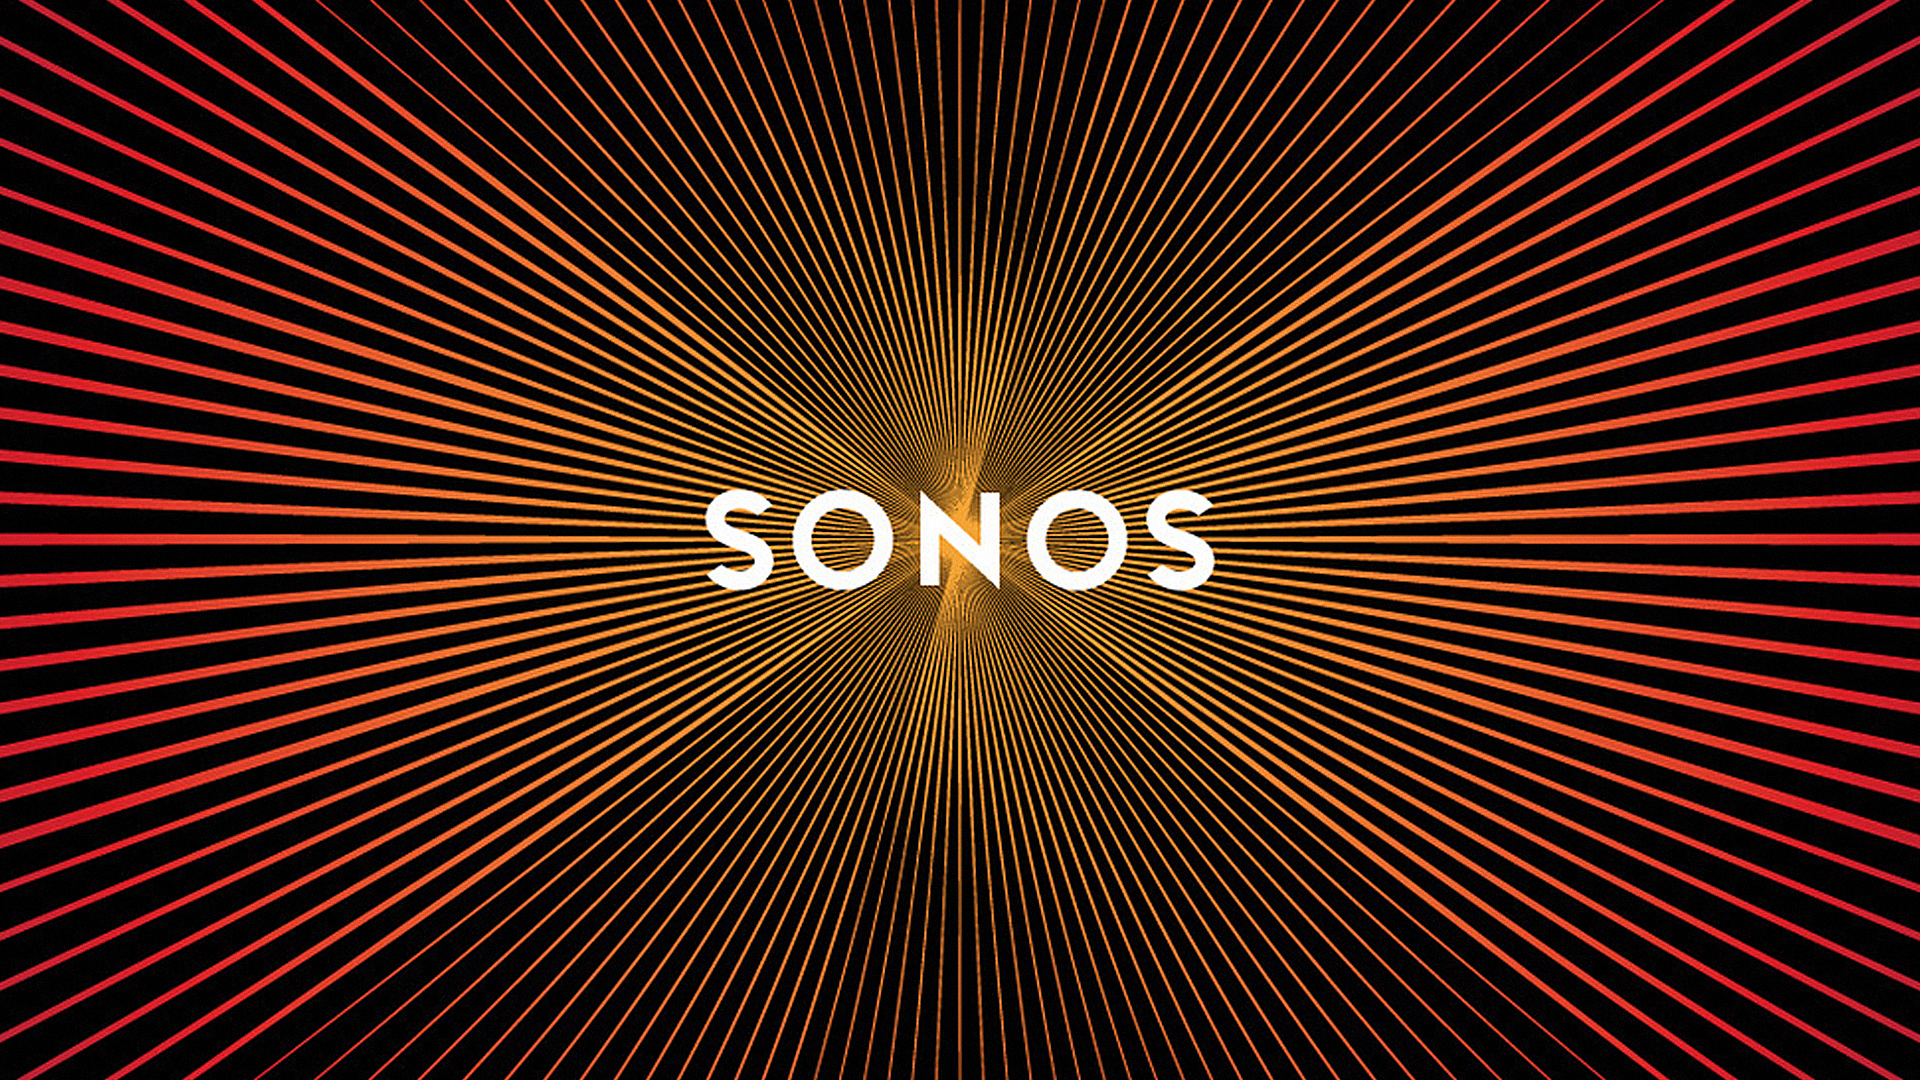 3041367-poster-p-1-sonoss-hot-new-viral-logo-was-a-happy-accident1